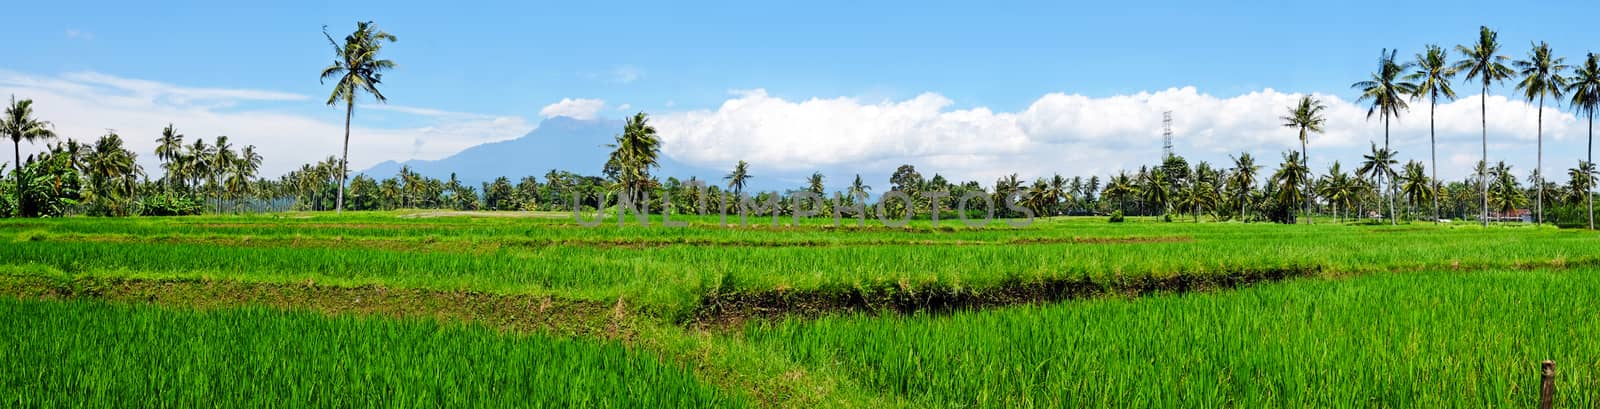 Panorama from rice field landscape on Java island, Indonesia by devy